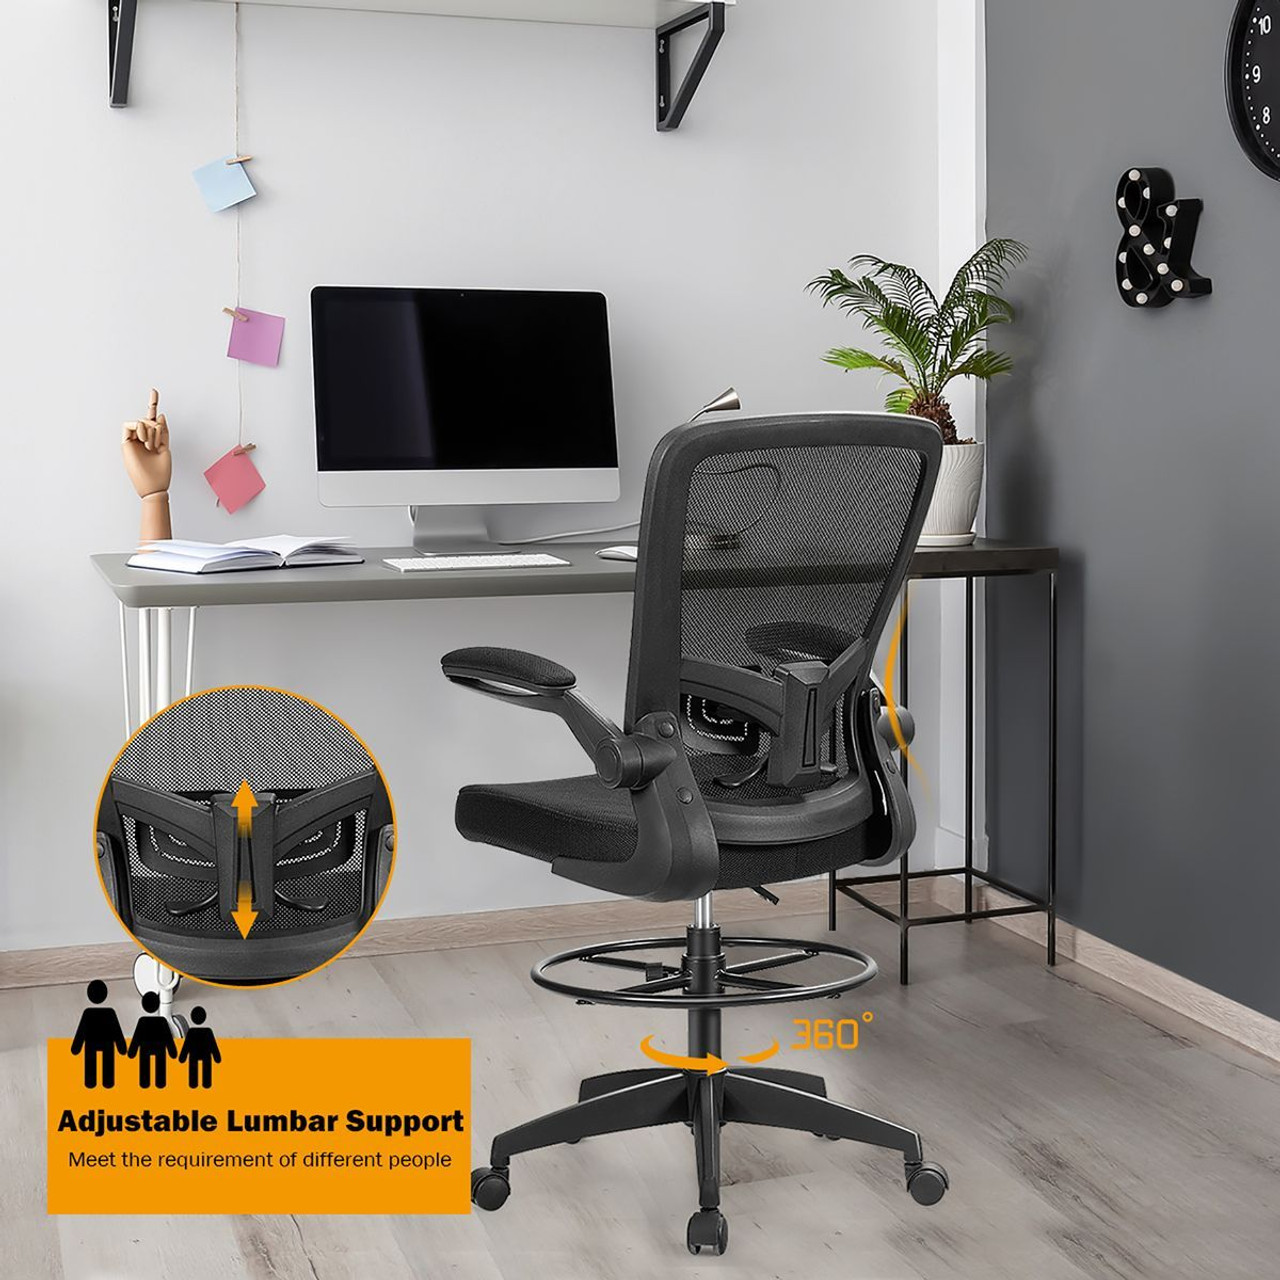 Height-Adjustable Drafting Chair with Flip-up Arms product image